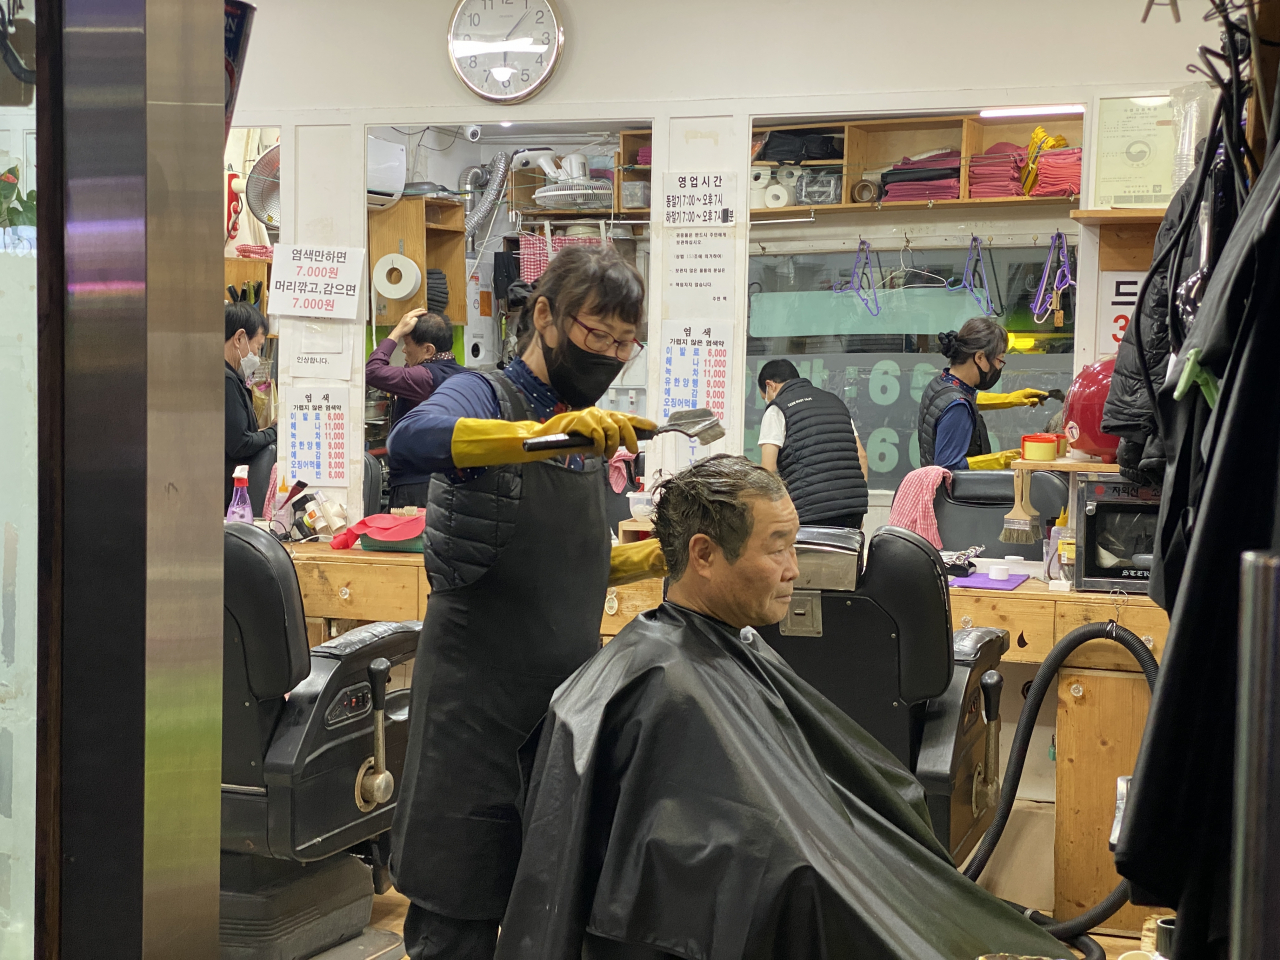 A customer gets his hair dyed at a barbershop in Nakwon-dong, central Seoul, Tuesday. (Hwang Joo-young/The Korea Herald)